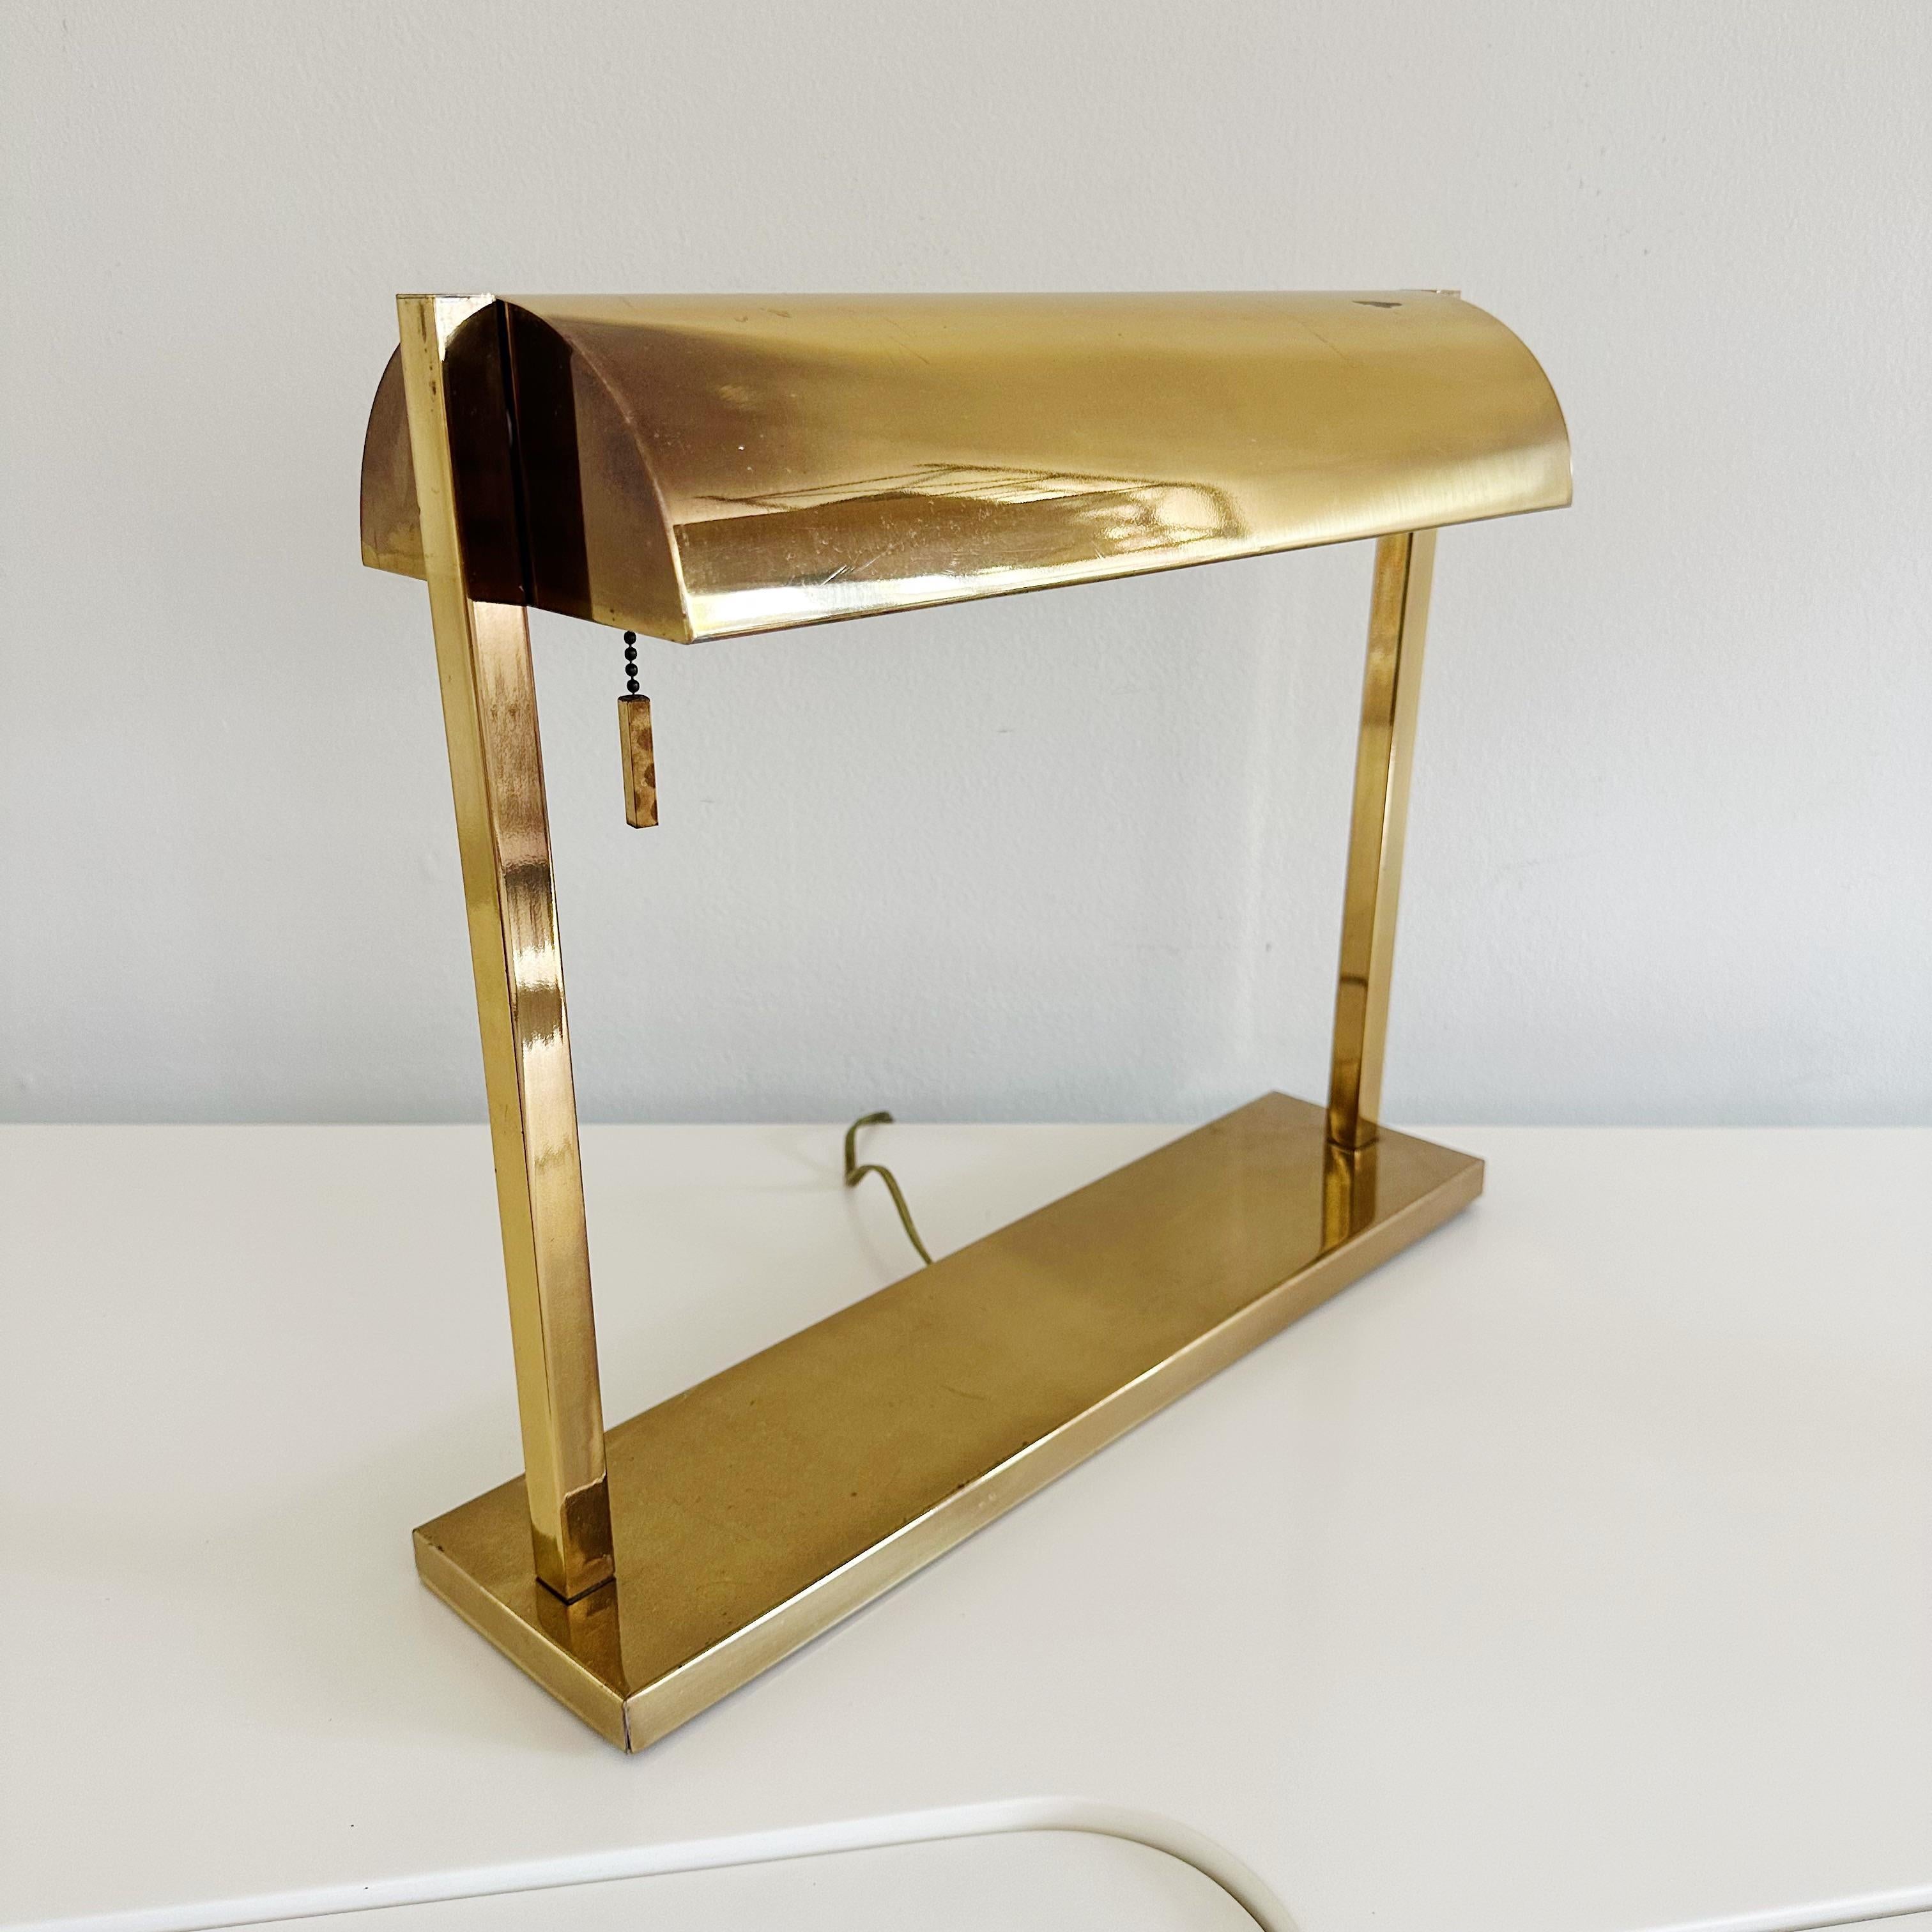 Mid Century Brass Bankers Desk Lamp

Mid 20th century bankers desk lamp in brass with the interior of the adjustable shade being in white enamel, unsigned original wiring